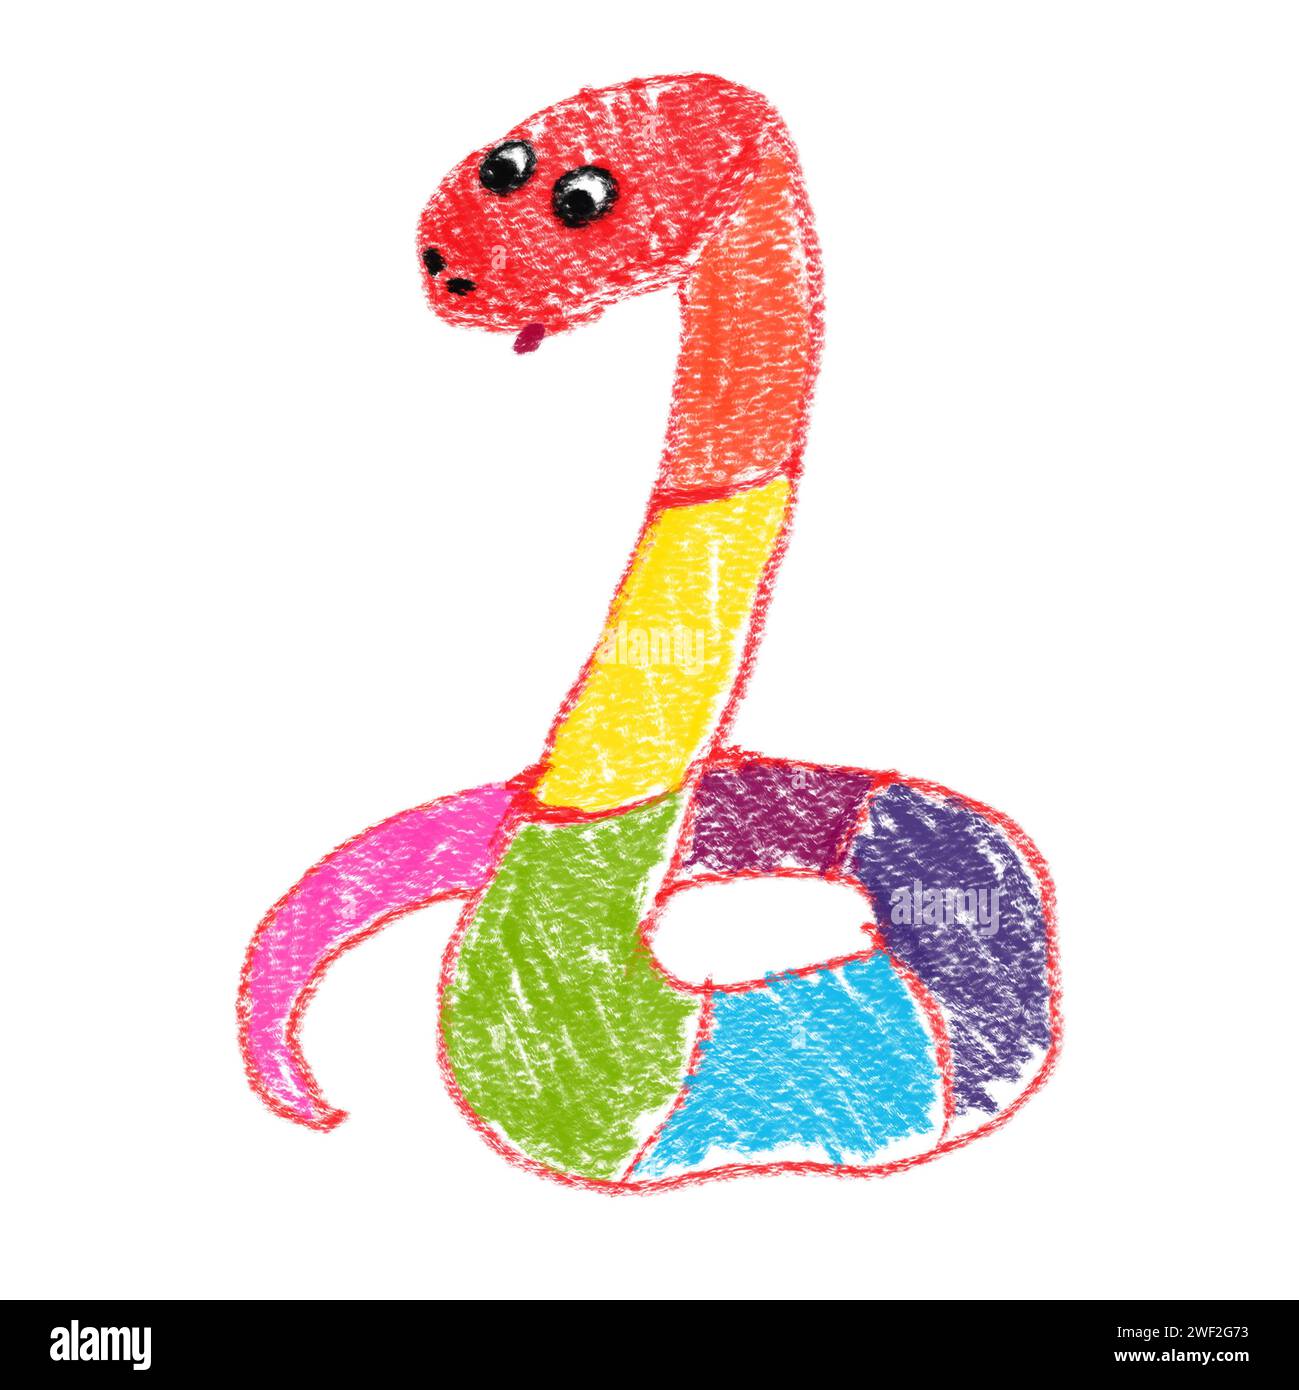 Hand-drawn simple colorful snake on white background. Kid's drawings using pencil technique. Isolated images. For design and card Stock Photo